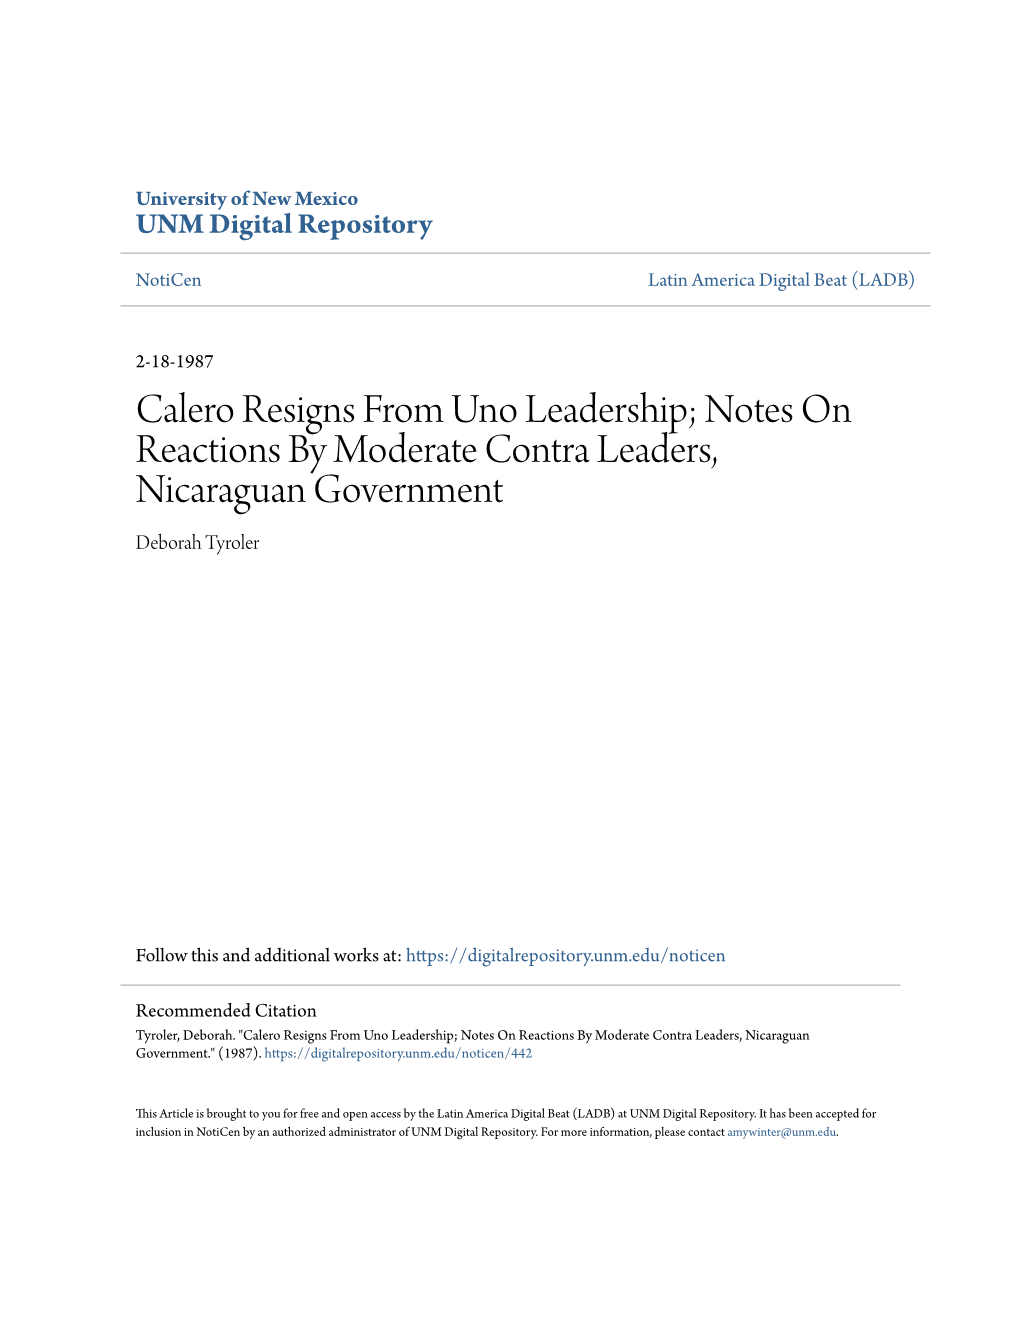 Calero Resigns from Uno Leadership; Notes on Reactions by Moderate Contra Leaders, Nicaraguan Government Deborah Tyroler